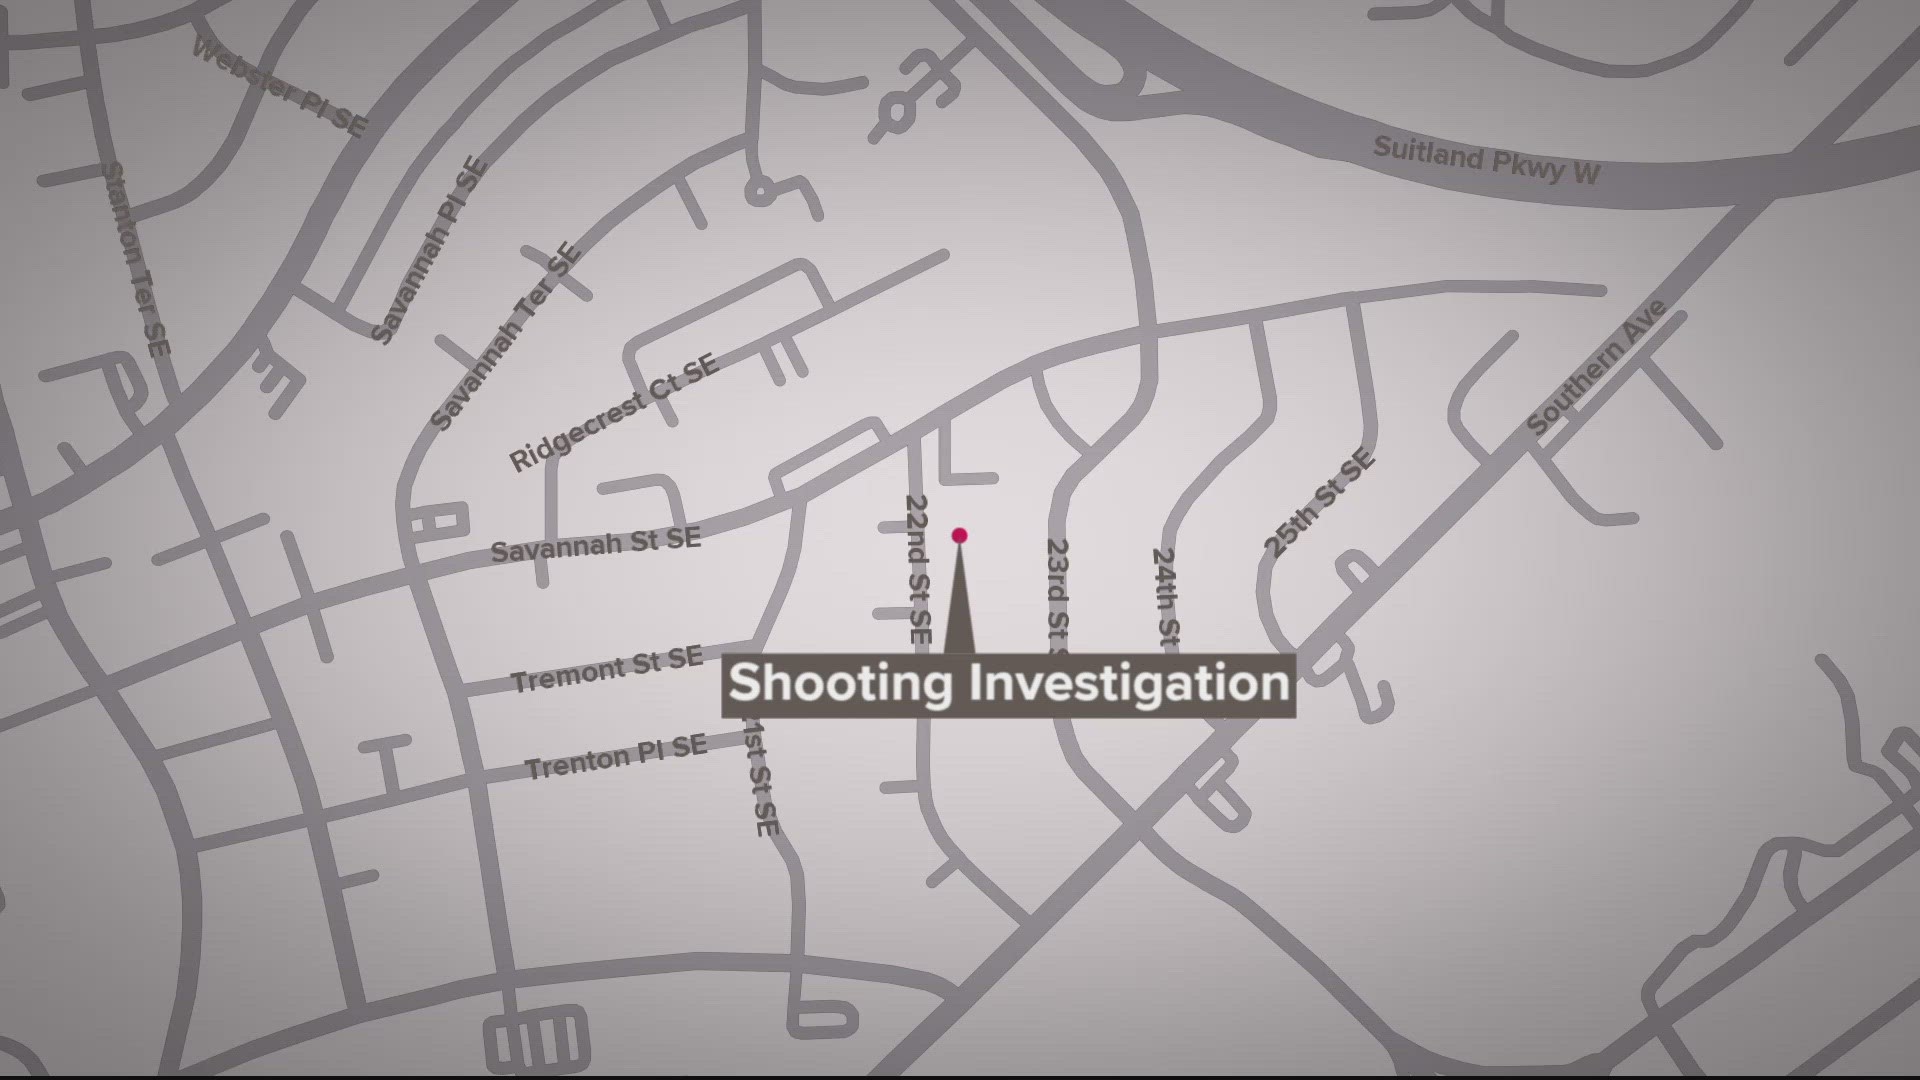 DC Police are investigating two overnight shooting in Southeast.